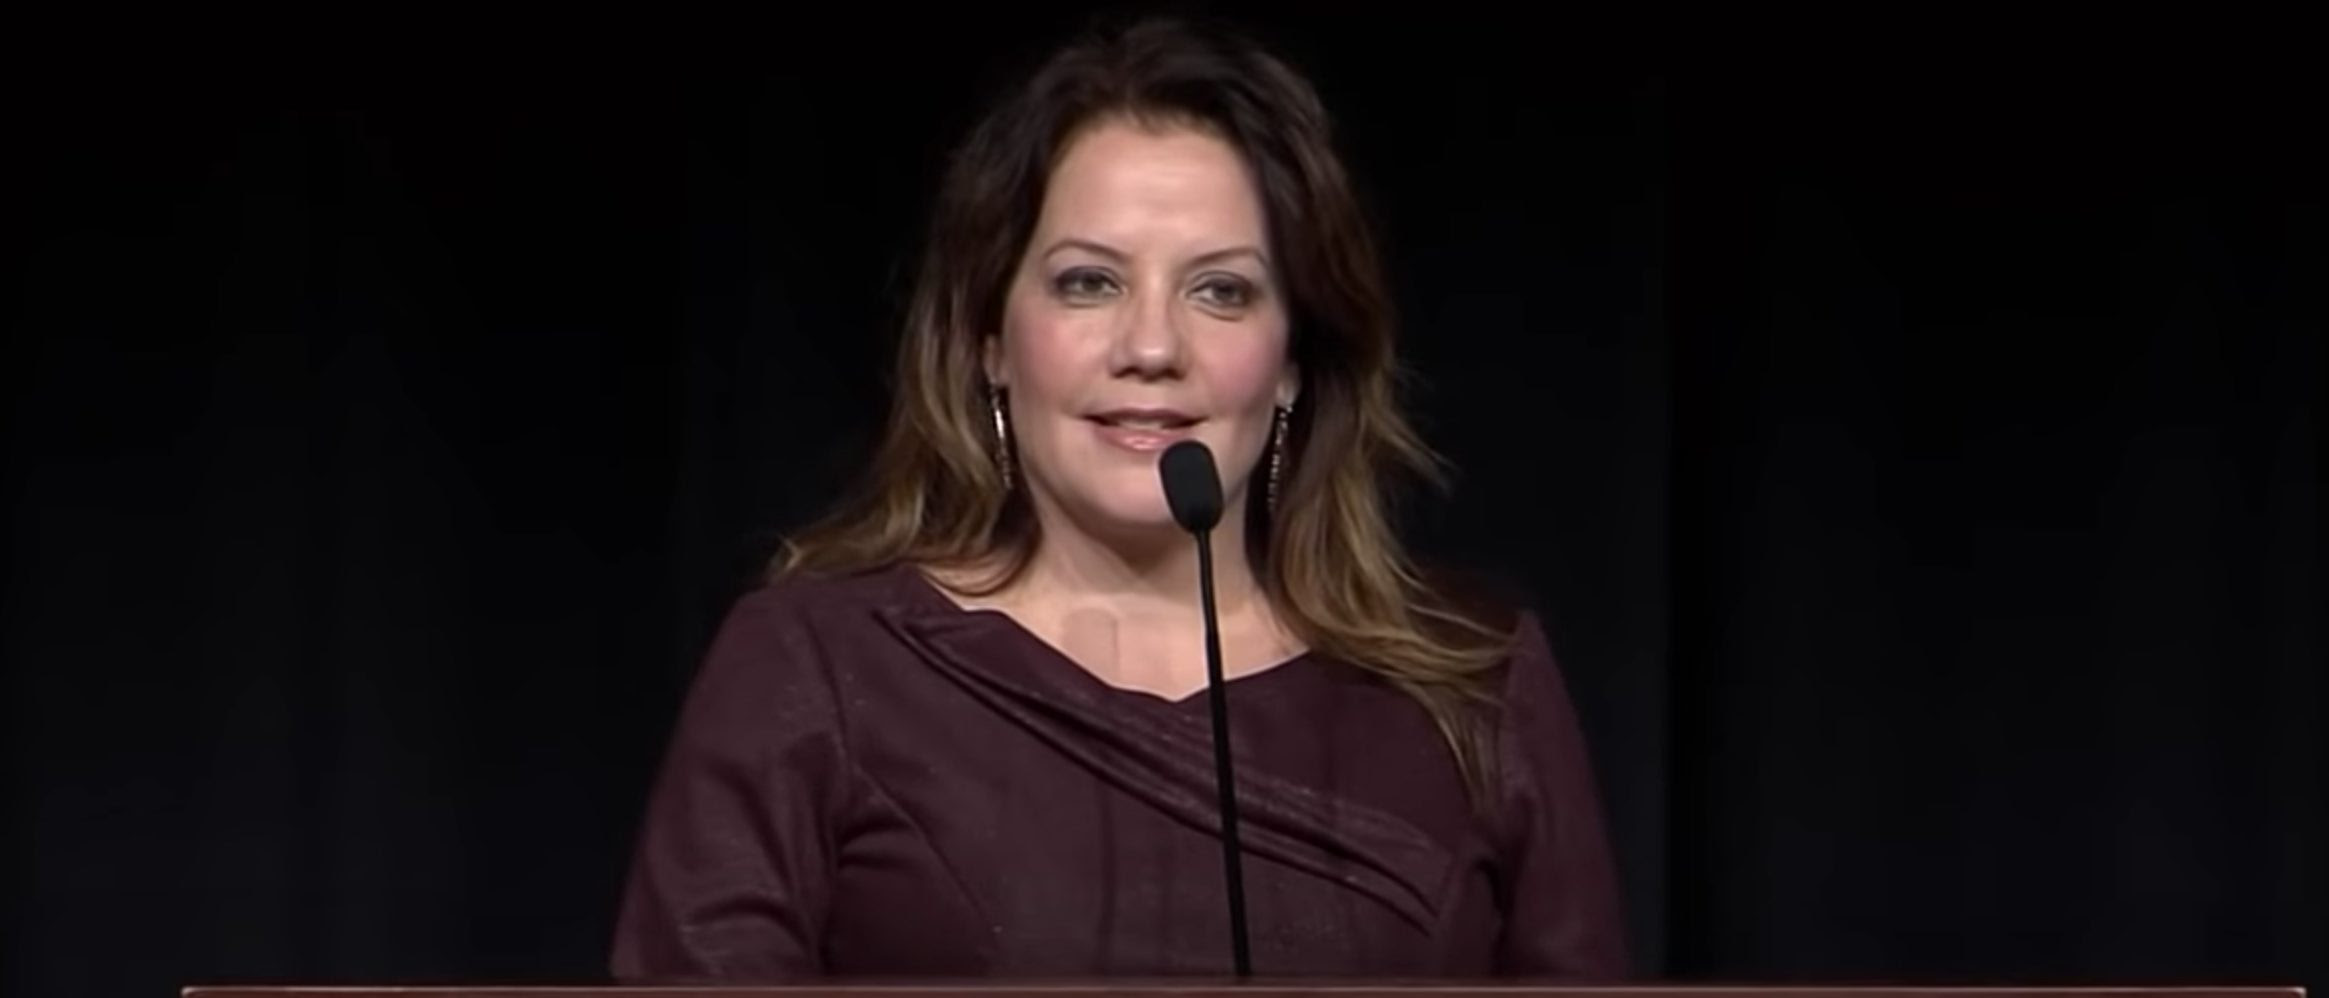 ‘Fully Weaponized’: Mollie Hemingway Says DOJ Has Double Standard For Liberals, Conservatives